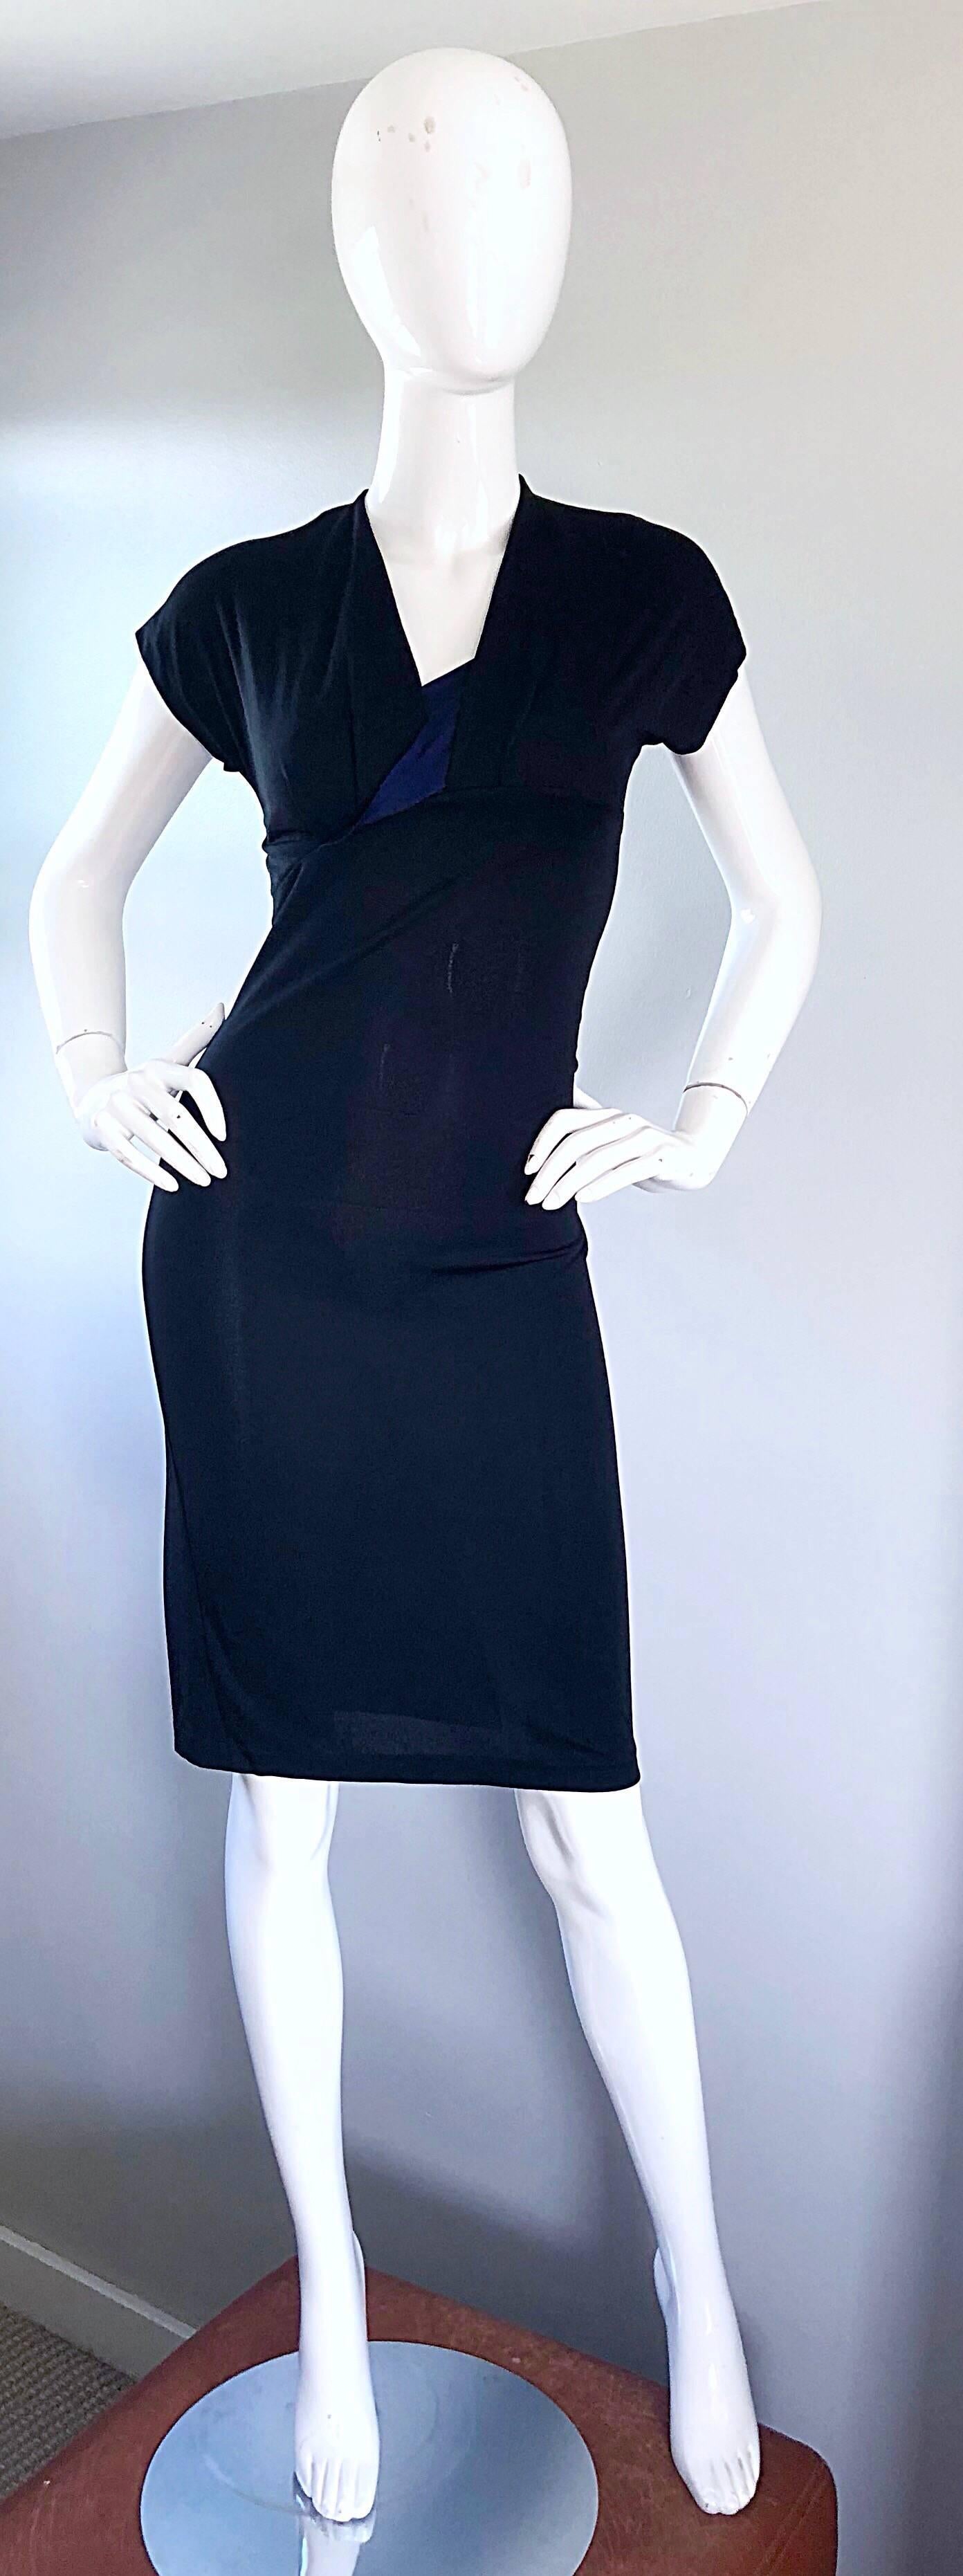 The perfect little black dress! This 1990s SALVATORE FERRAGOMO black and navy blue jersey dress is an easy winner! Features soft rayon jersey fabric that stretches to fit. Navy blue silk detail at center bust. There is so much attention to detail,